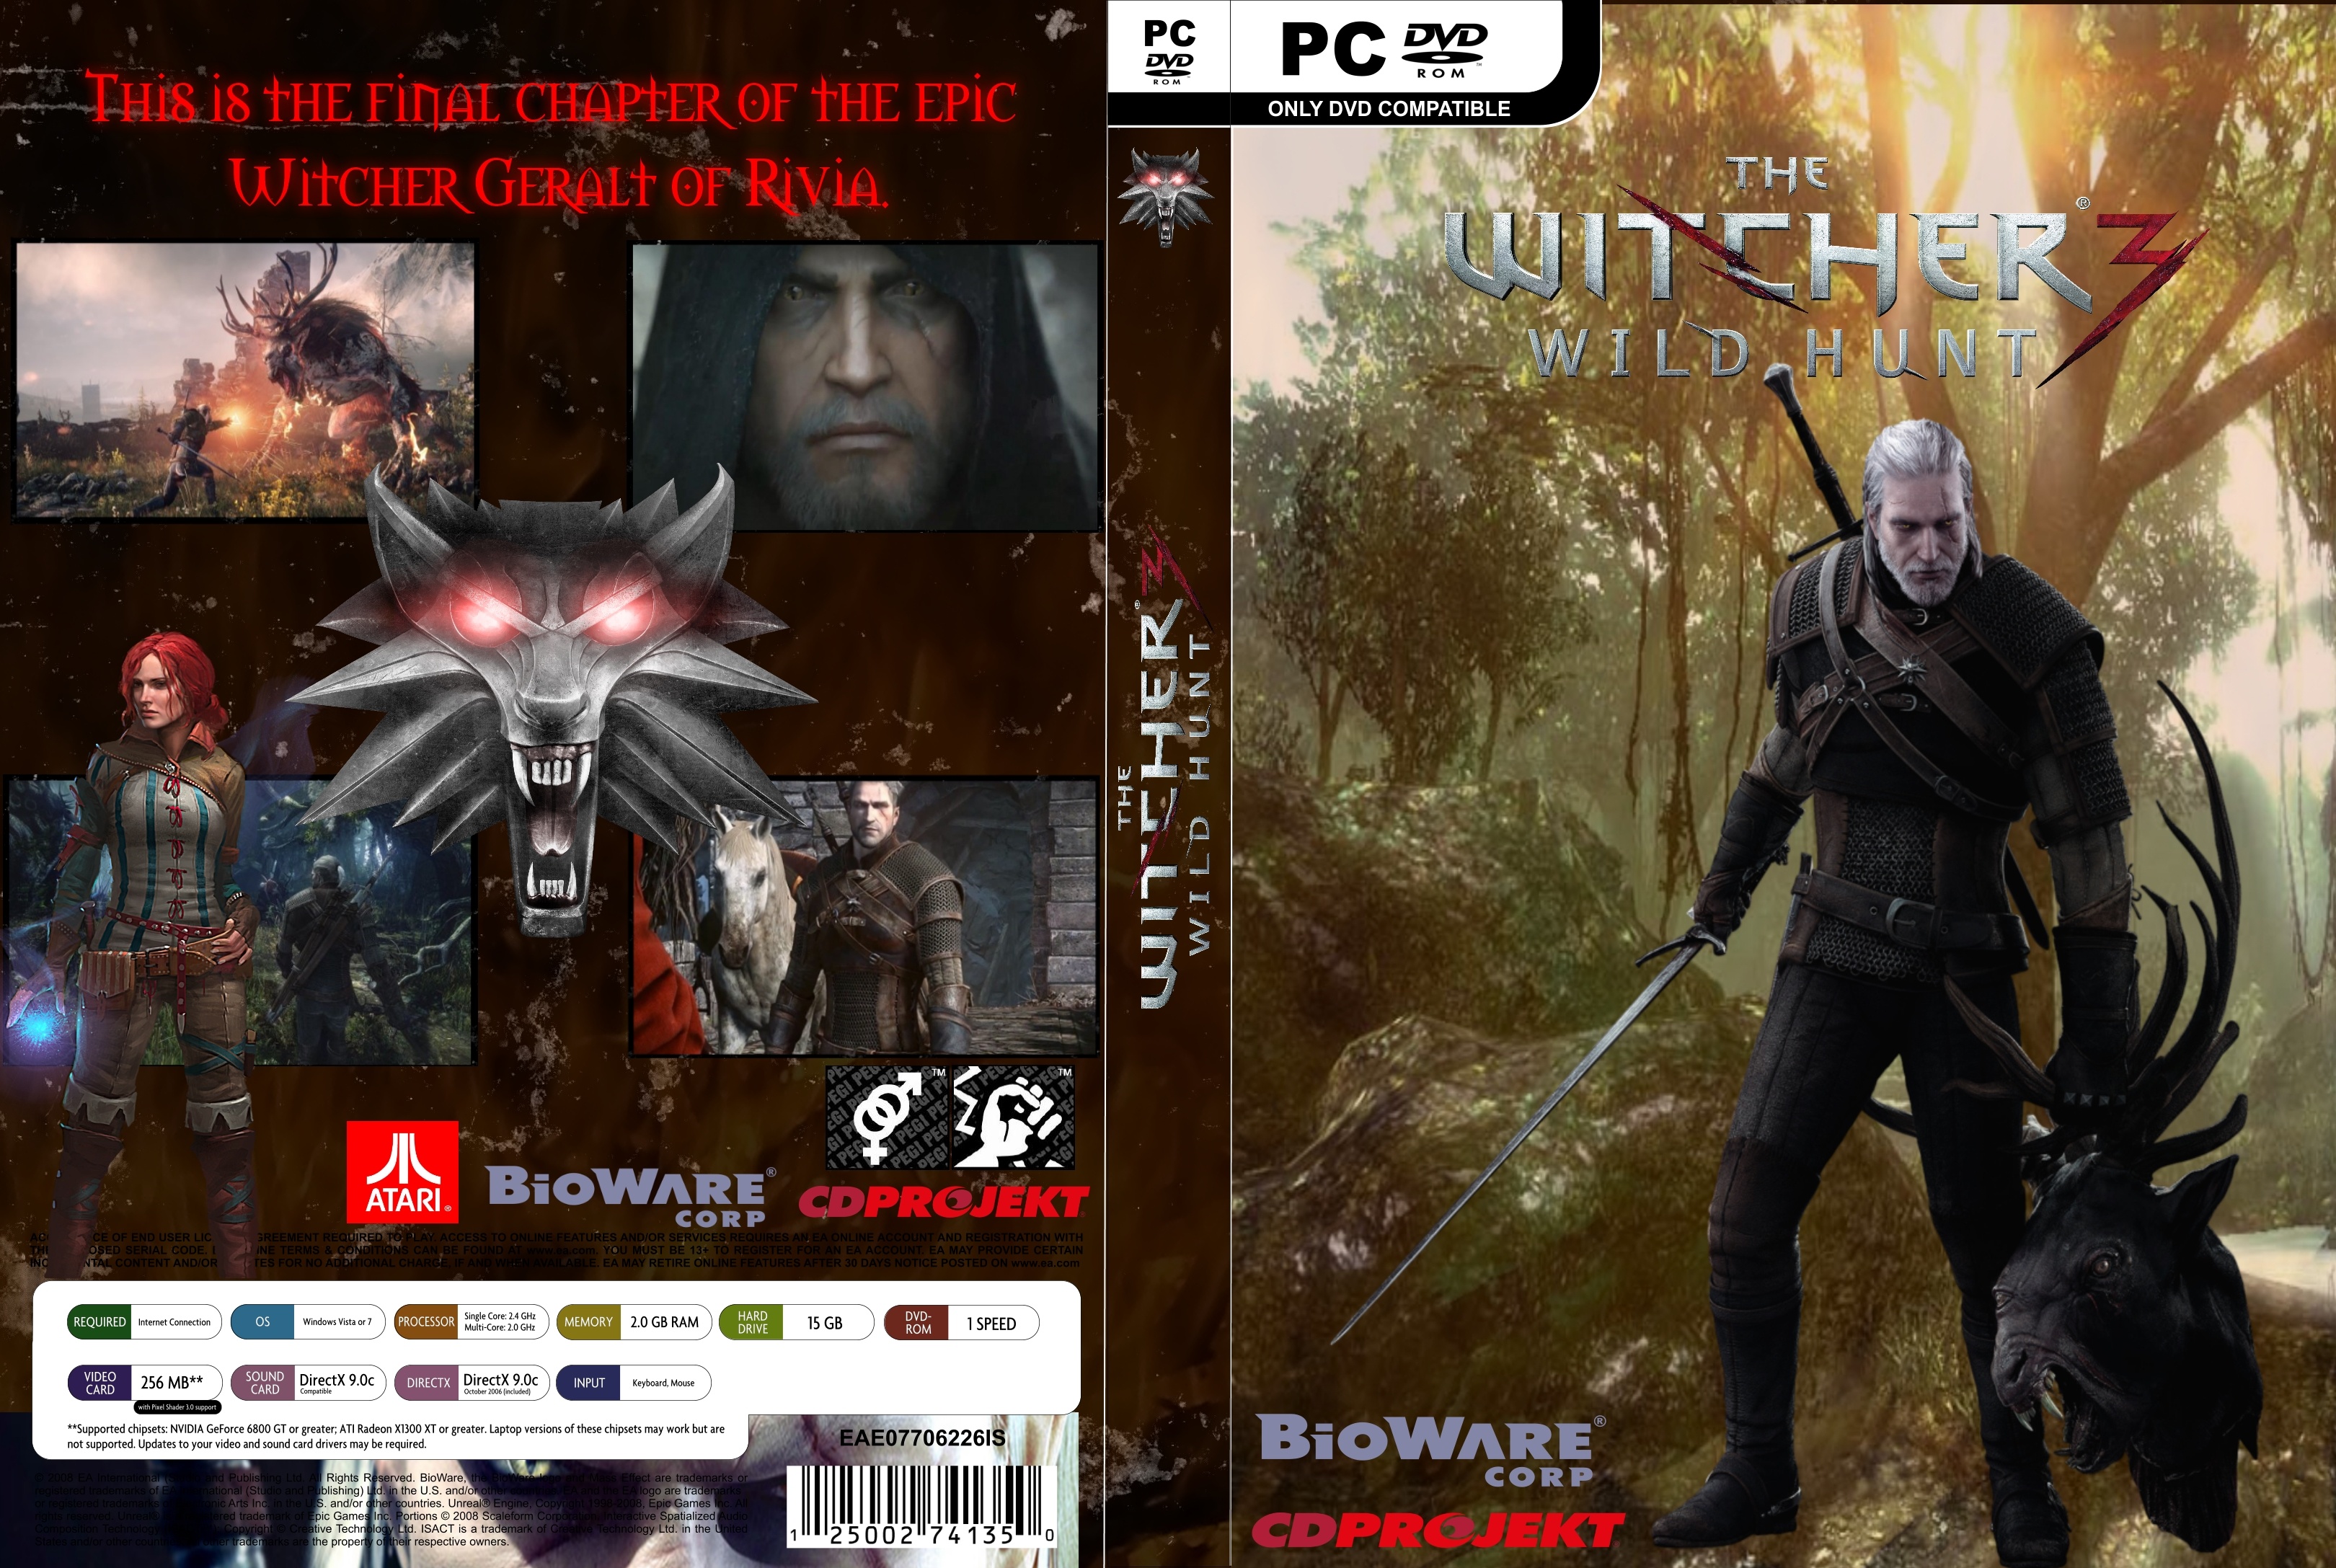 The Witcher 3 Wild Hunt box cover